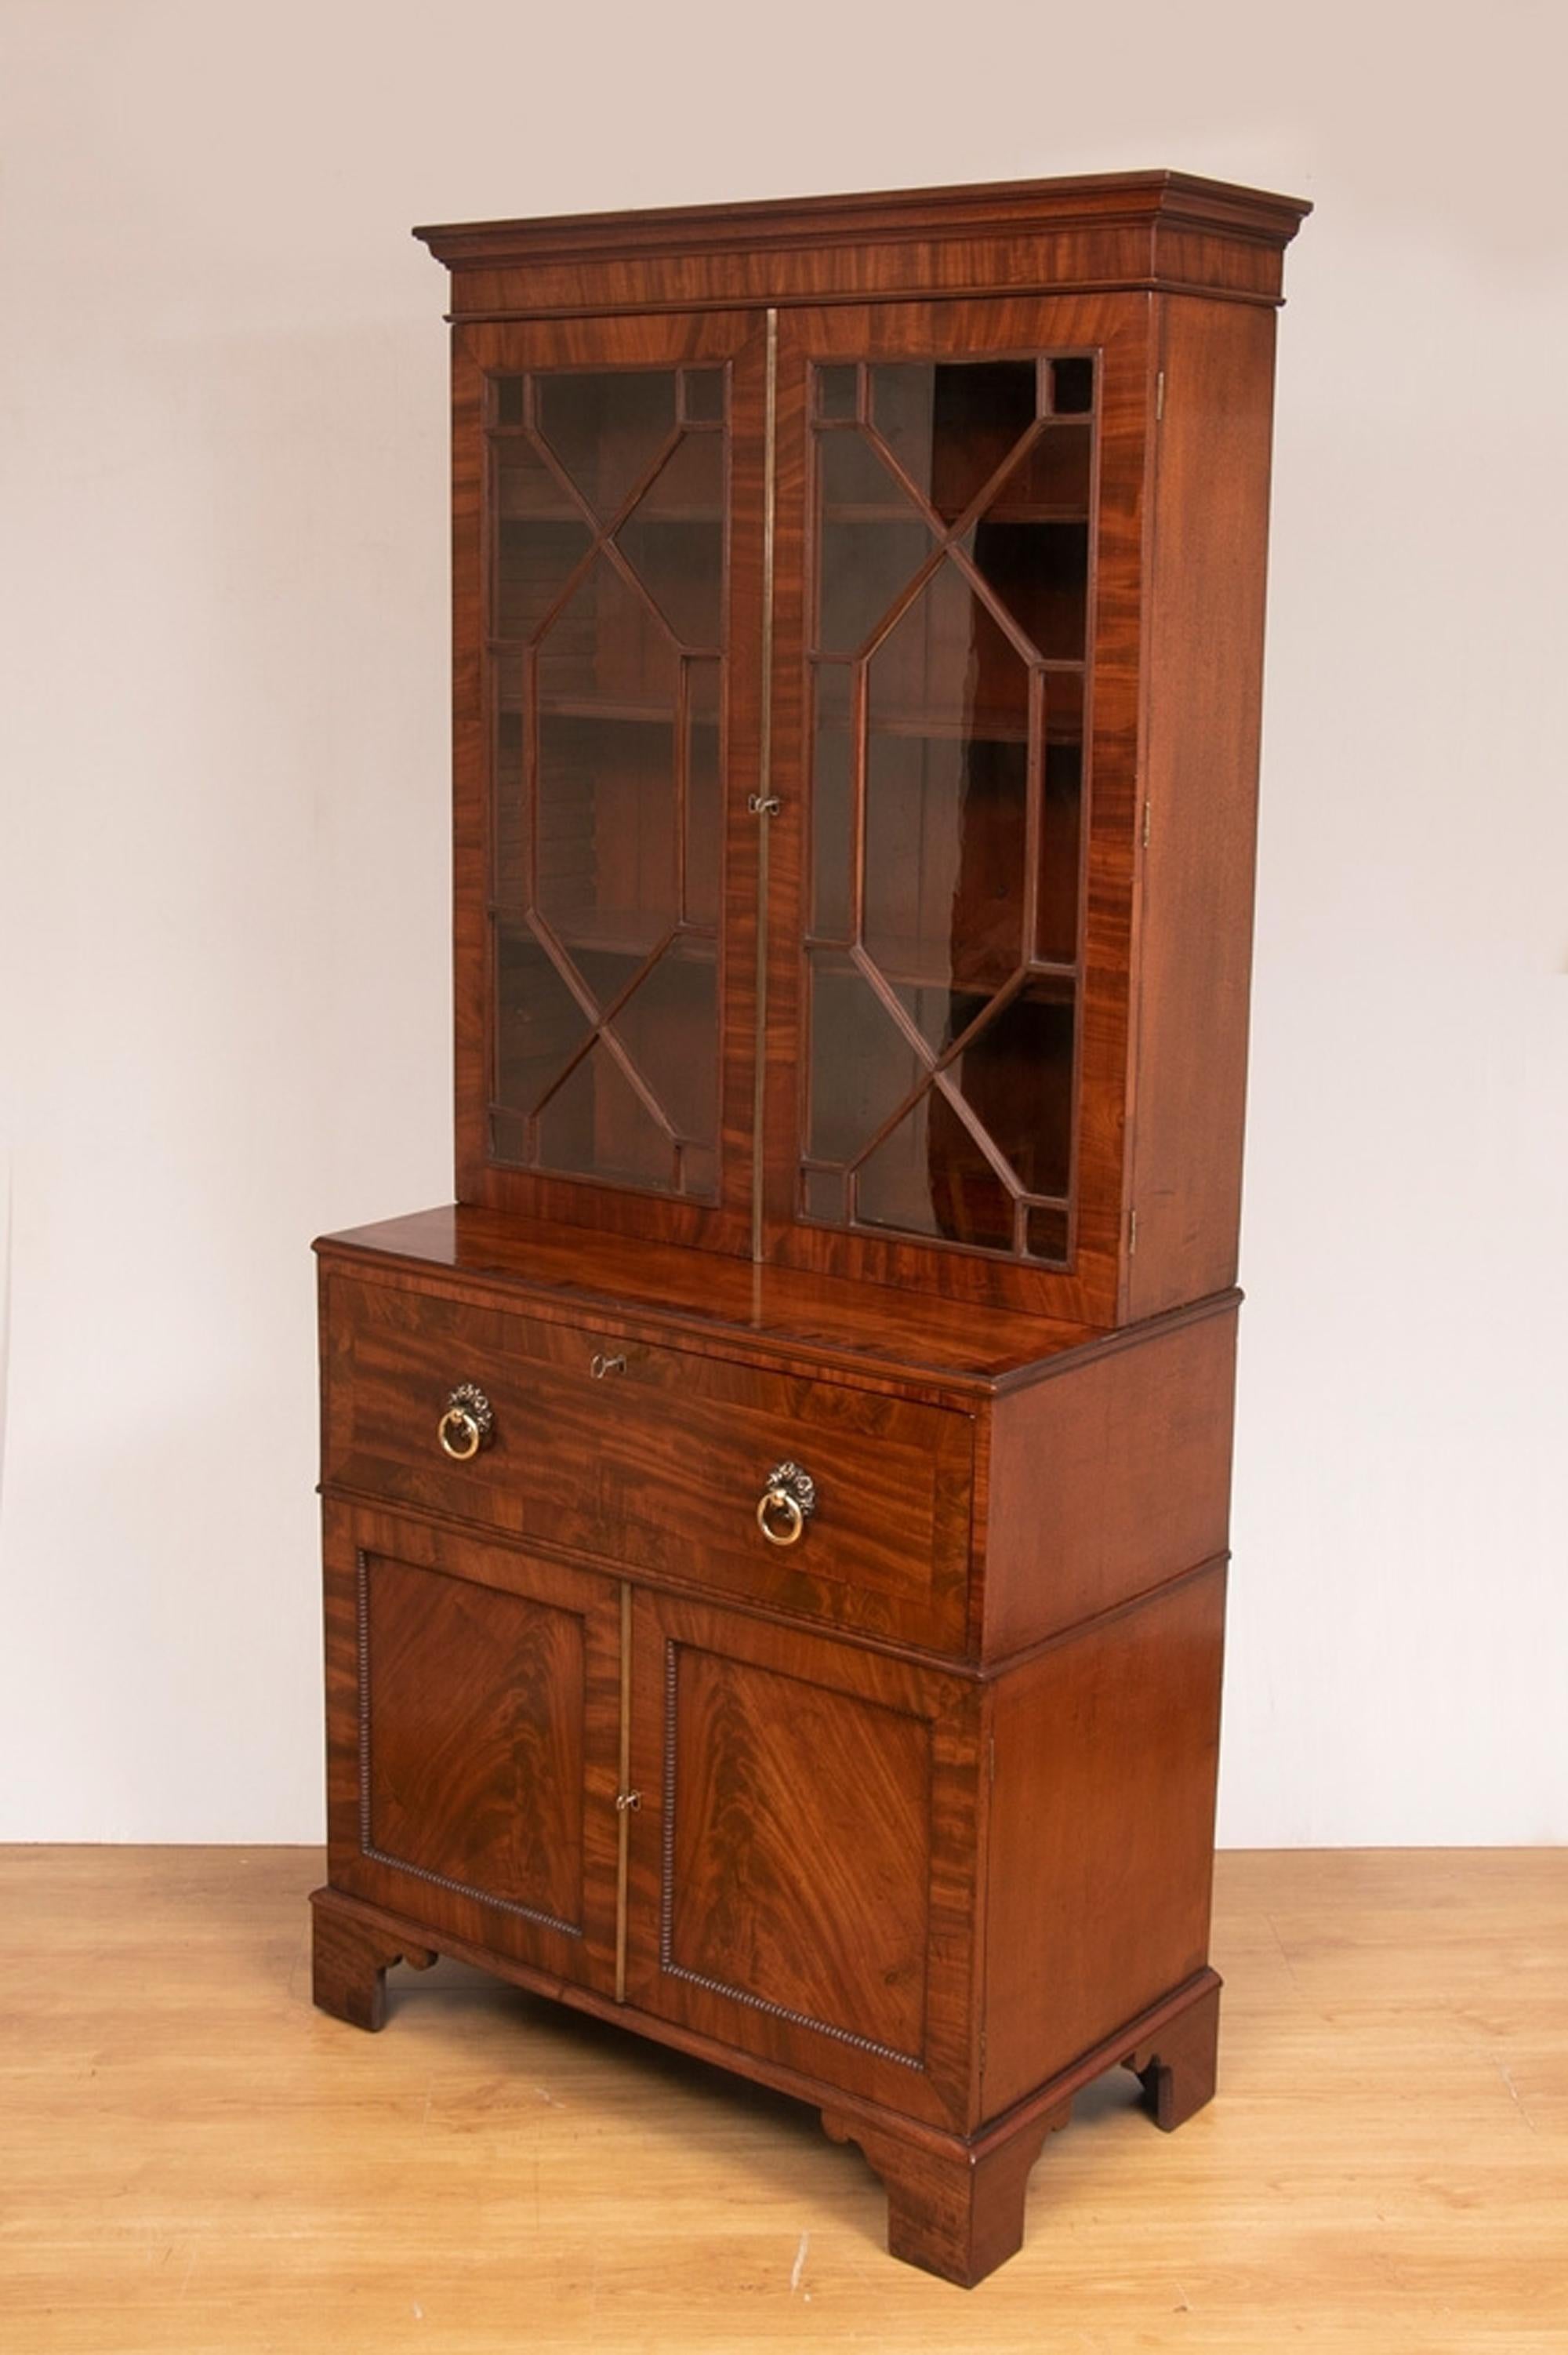 Small early Georgian 1780-1800 mahogany Secretaire bureau bookcase.
Very unusual to have such a fine quality Georgian bookcase and it to be so small, particularly its width.
 